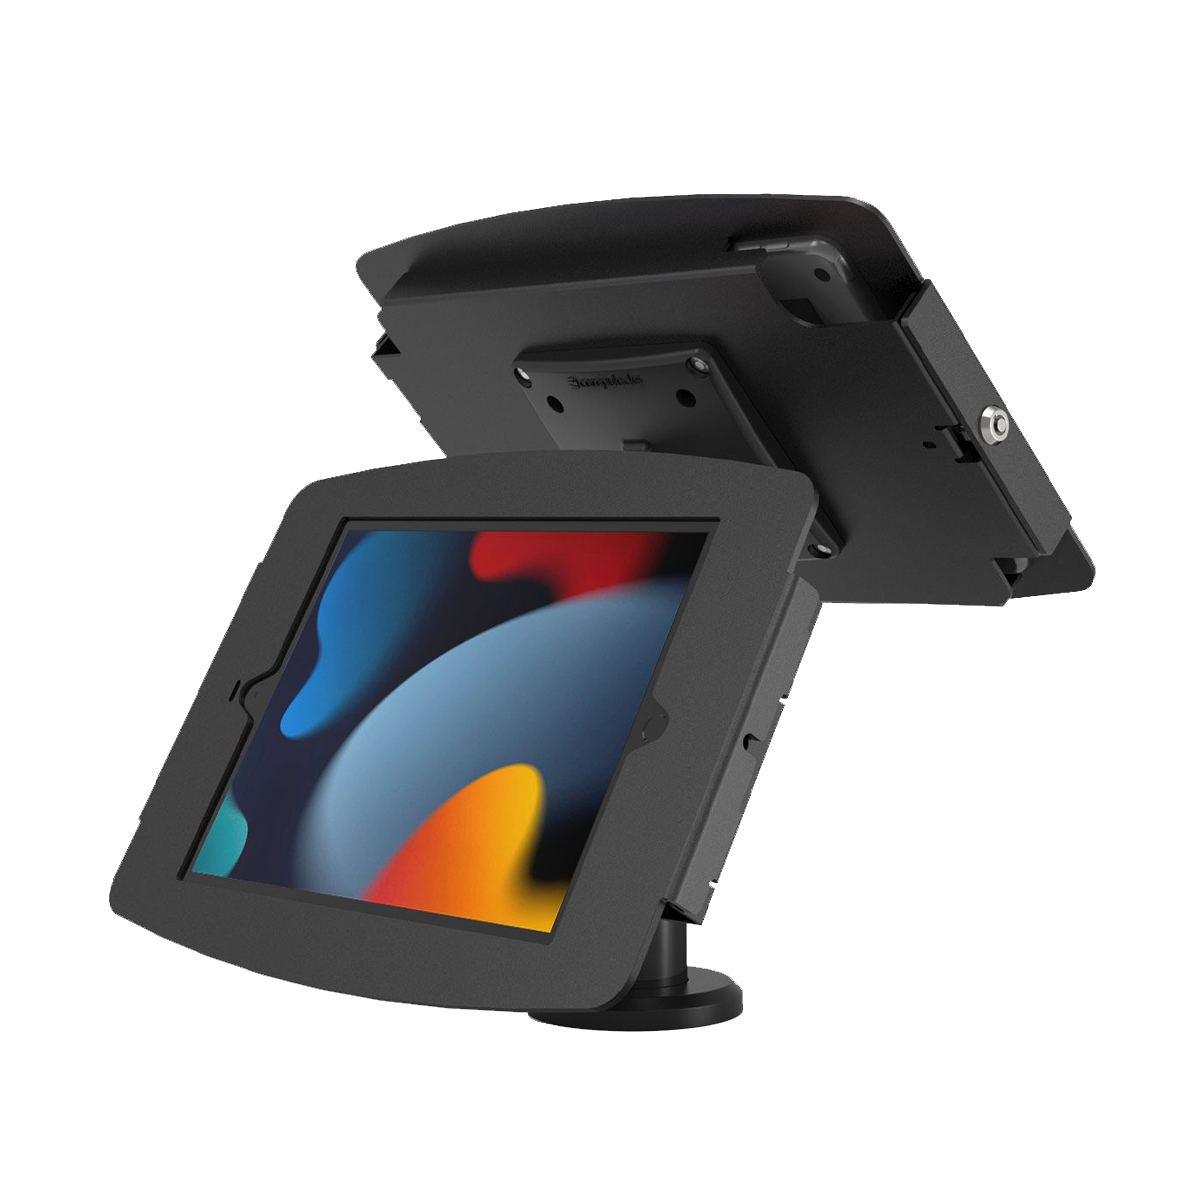 space-ipad-102-rise-20-dual-vertical-black-5-product-details